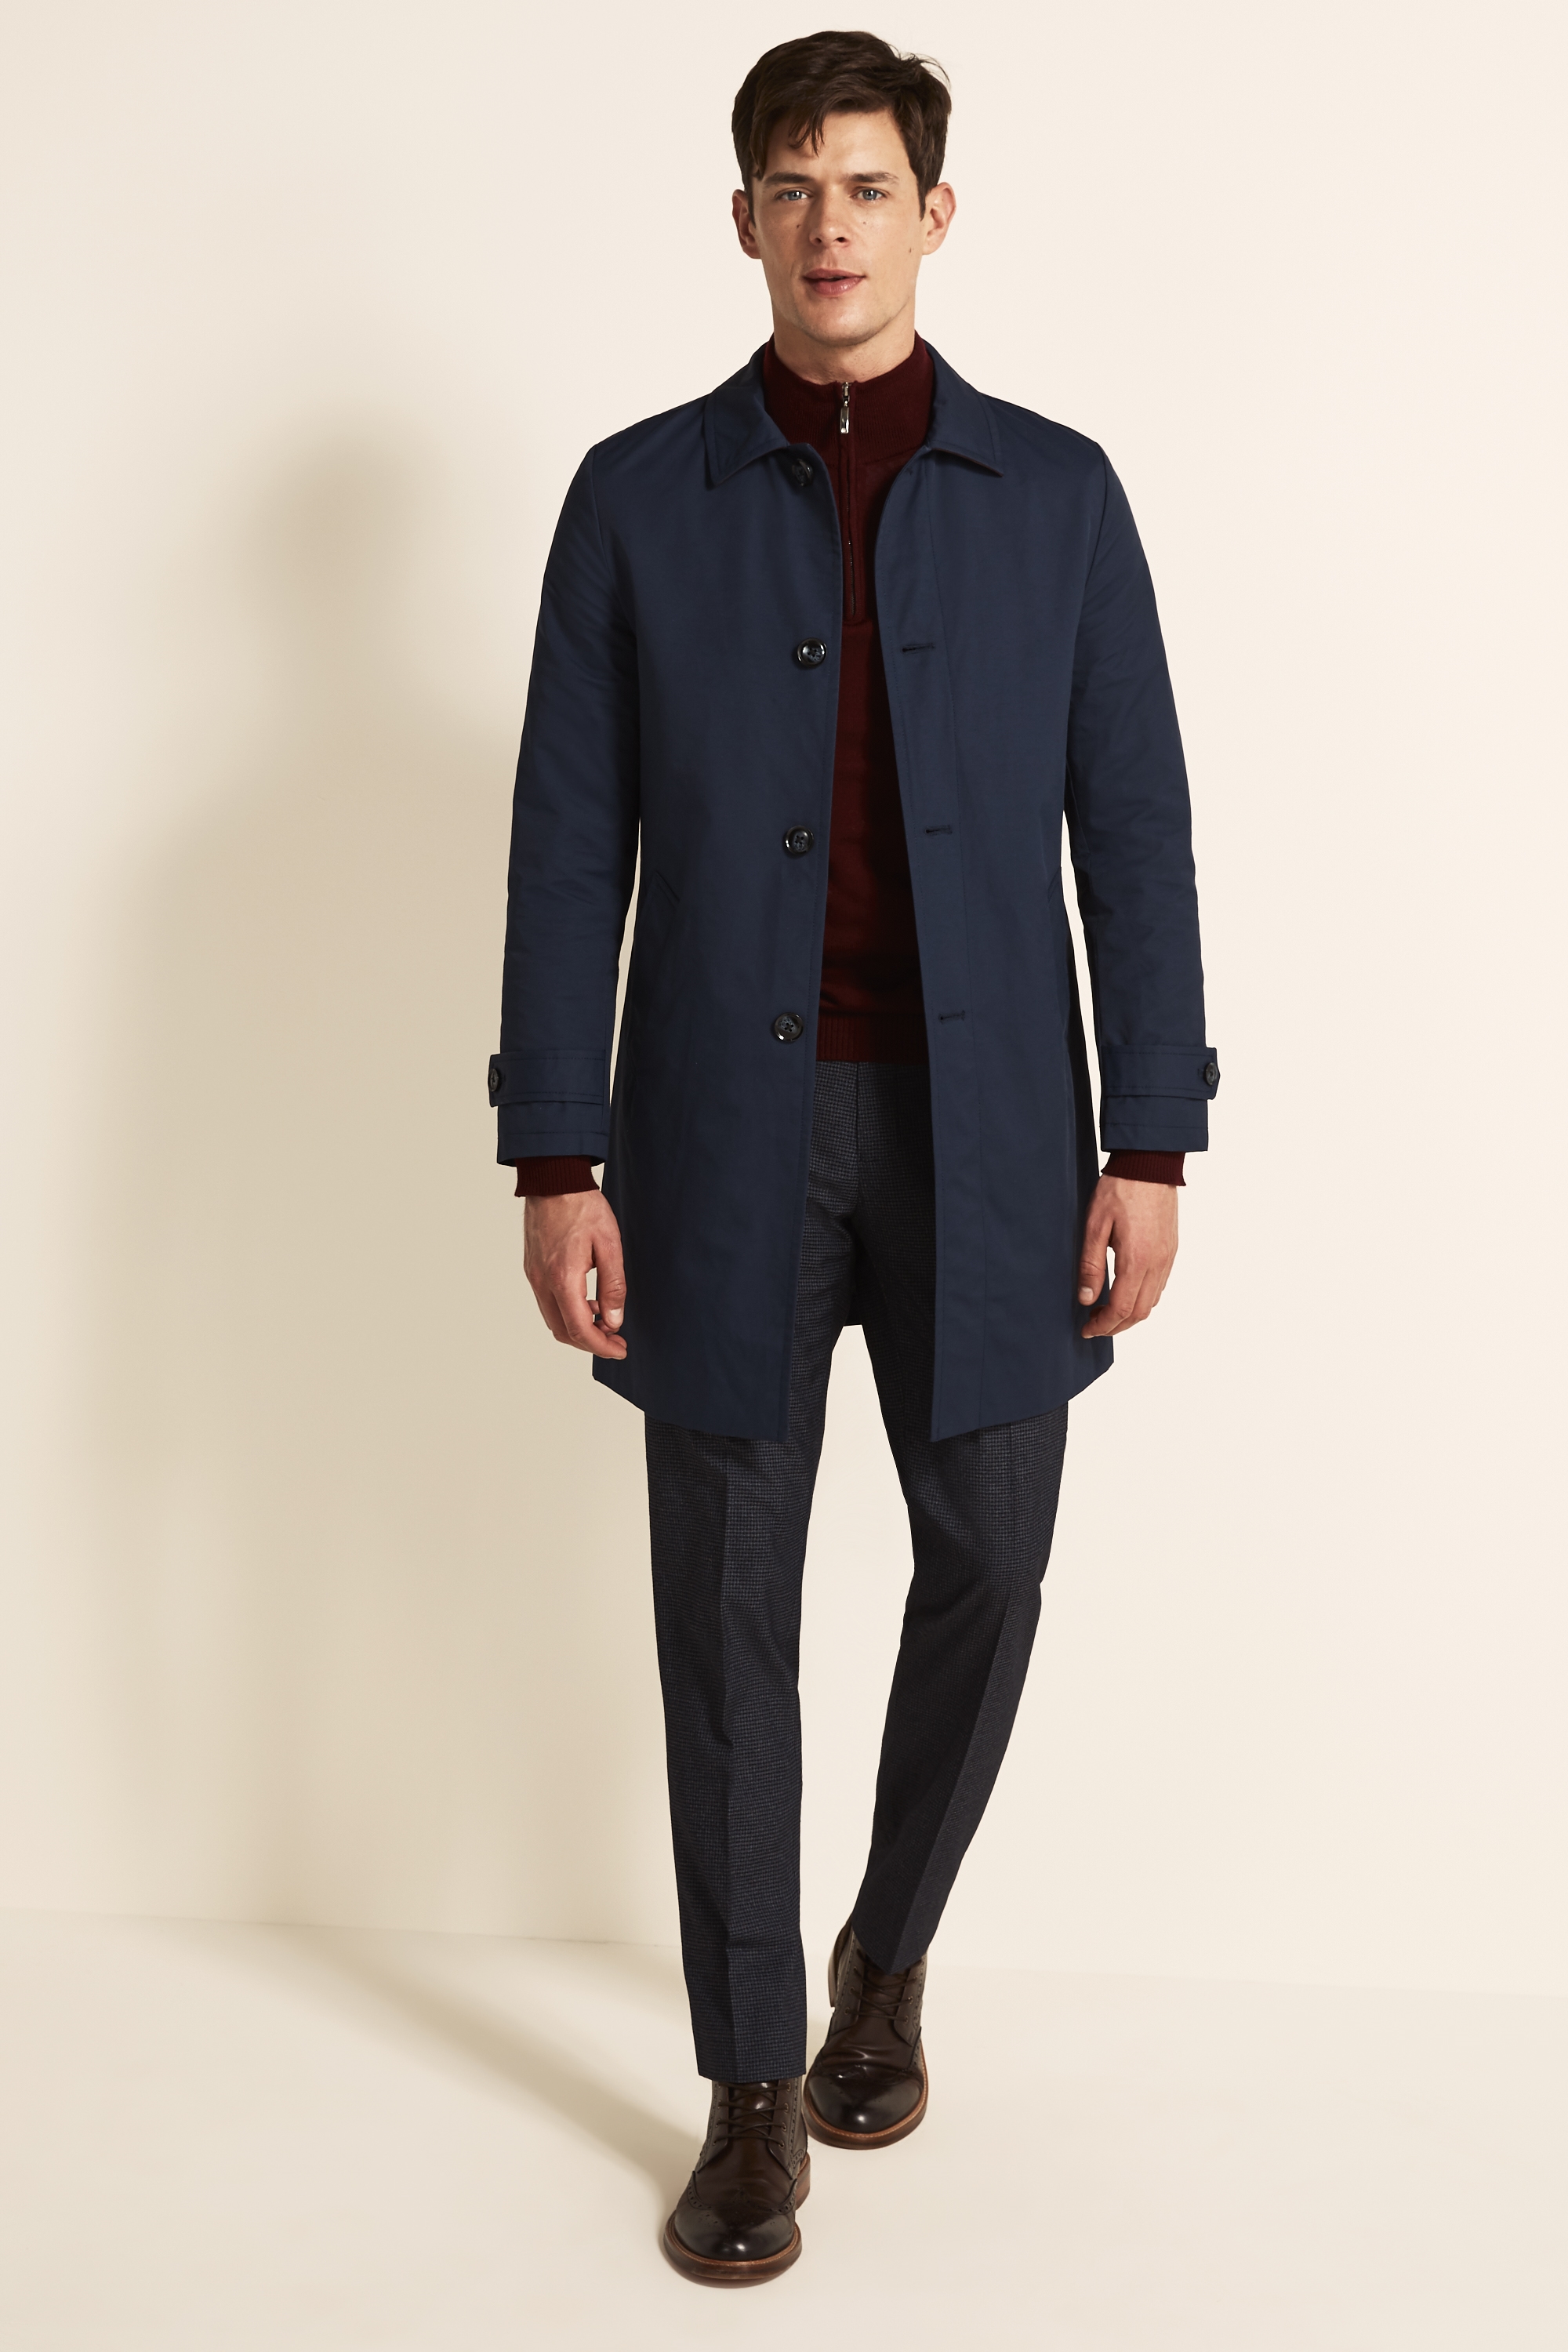 Tailored Fit Navy Raincoat | Buy Online at Moss